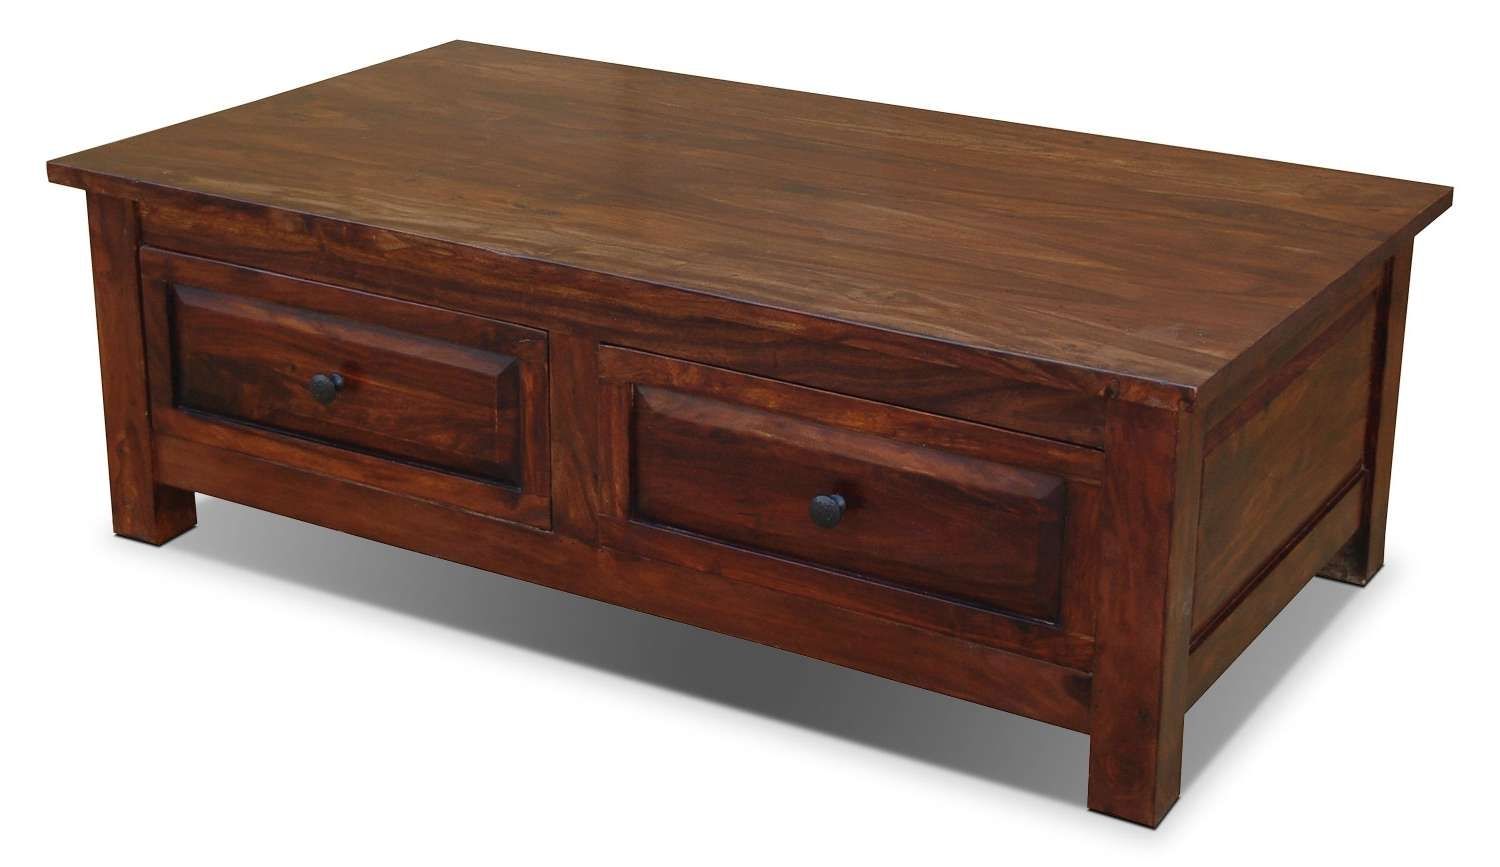 Most Popular Solid Wood Coffee Tables Regarding Solid Wood Coffee Table With Storage (Gallery 13 of 20)